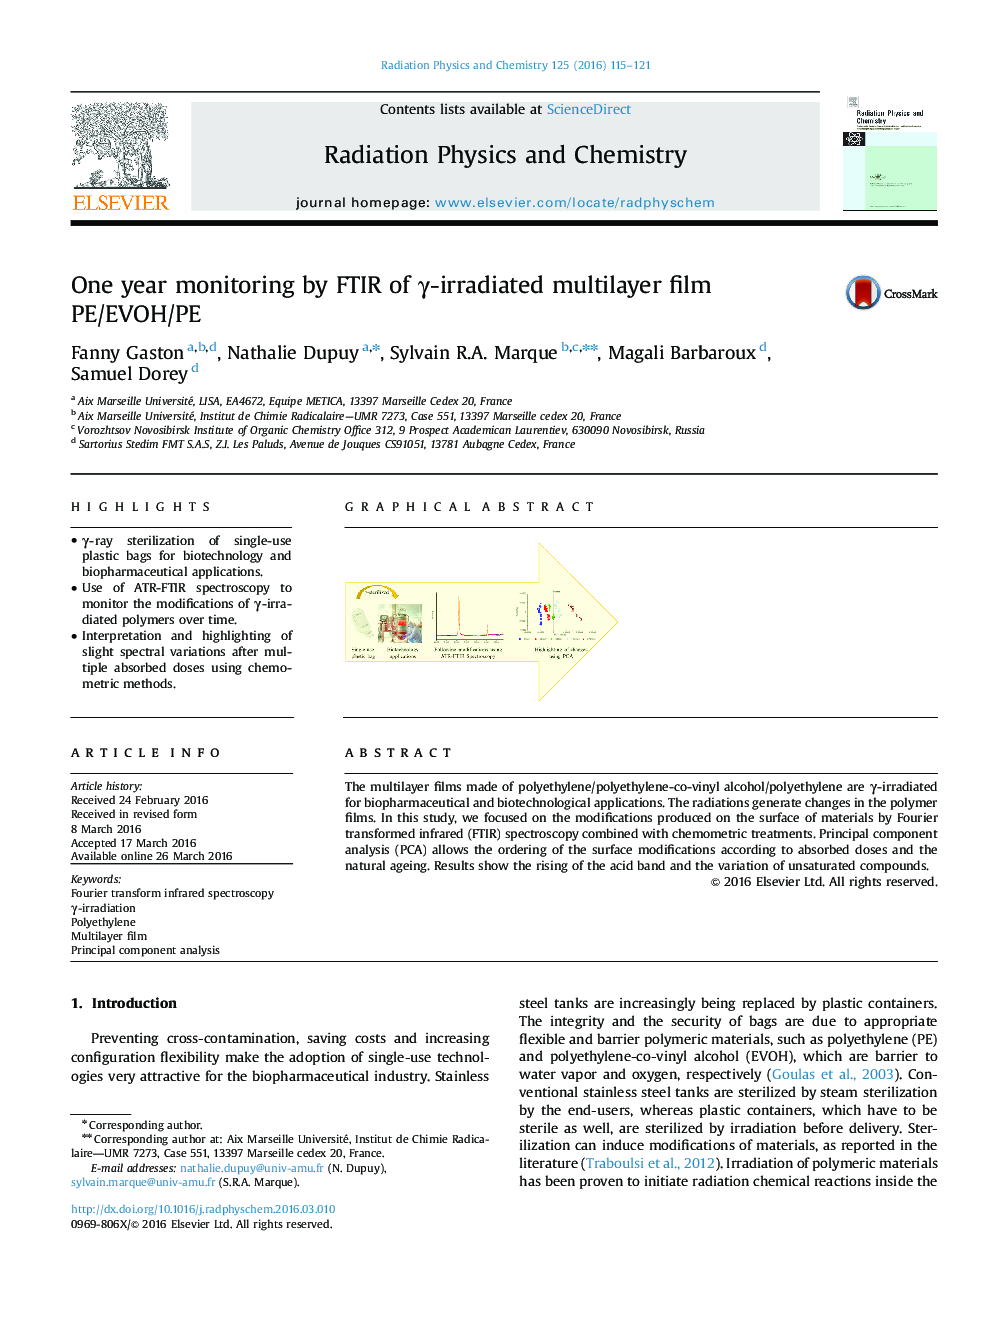 One year monitoring by FTIR of γ-irradiated multilayer film PE/EVOH/PE